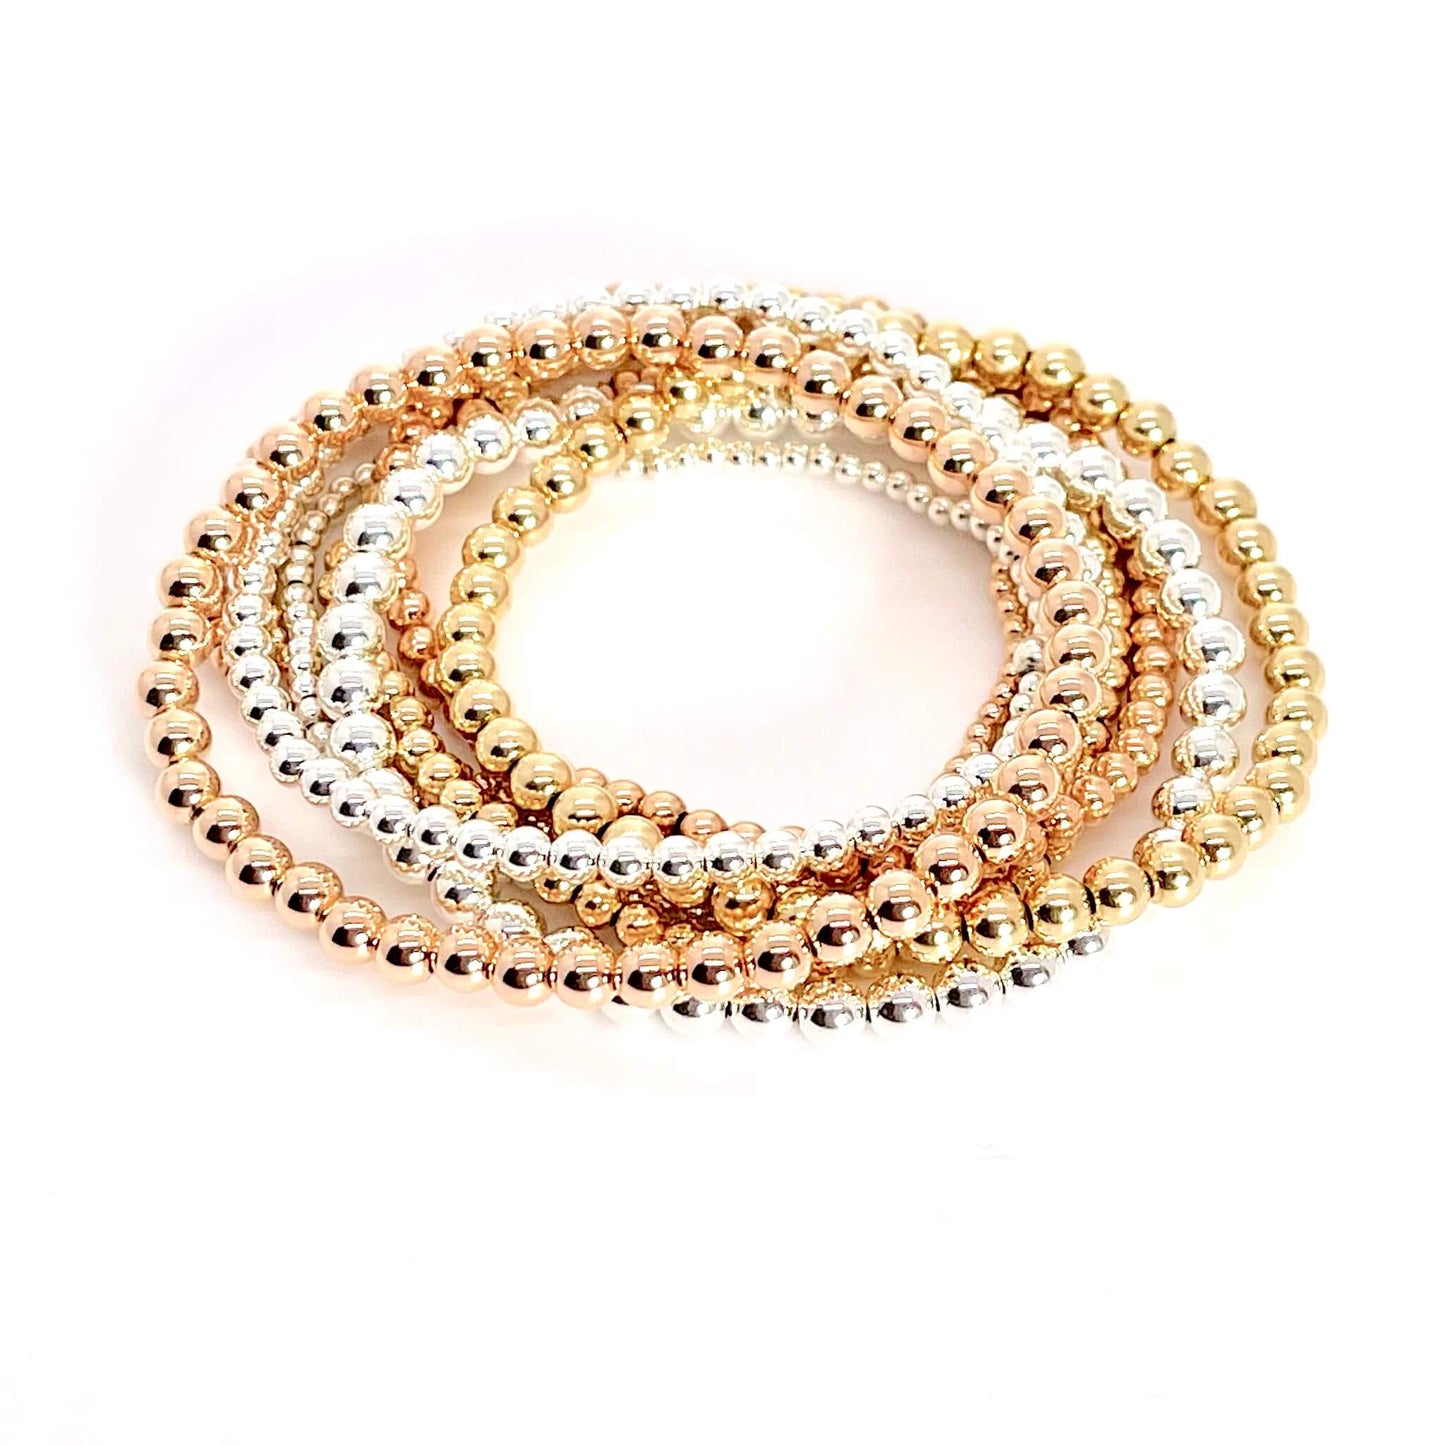 Rose gold, yellow gold, and silver beaded stretch bracelets stack.